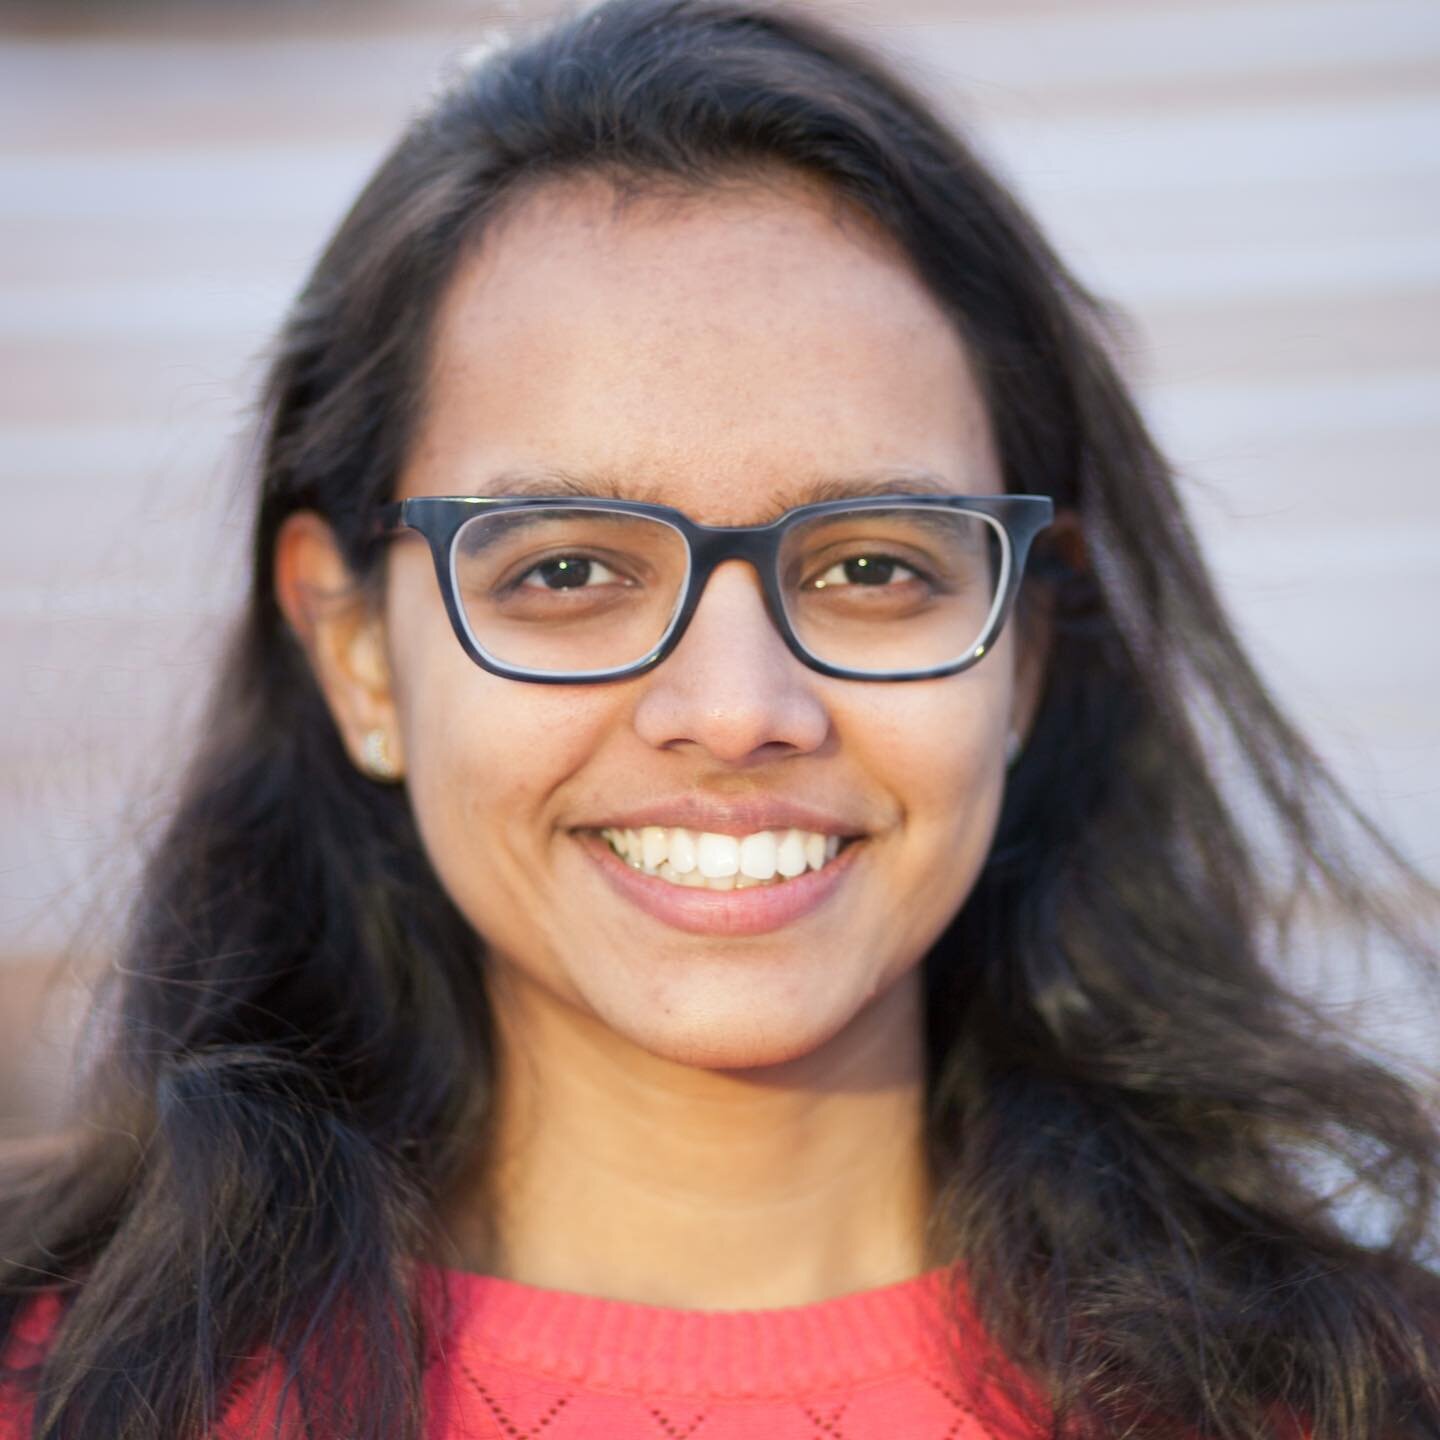 This International Women's Day, we spoke to two South Asian women in our community who are working to advance the energy transition in the face of global challenges. Vrindaa Somjit is a PhD student in MIT Materials Science and Engineering whose resea